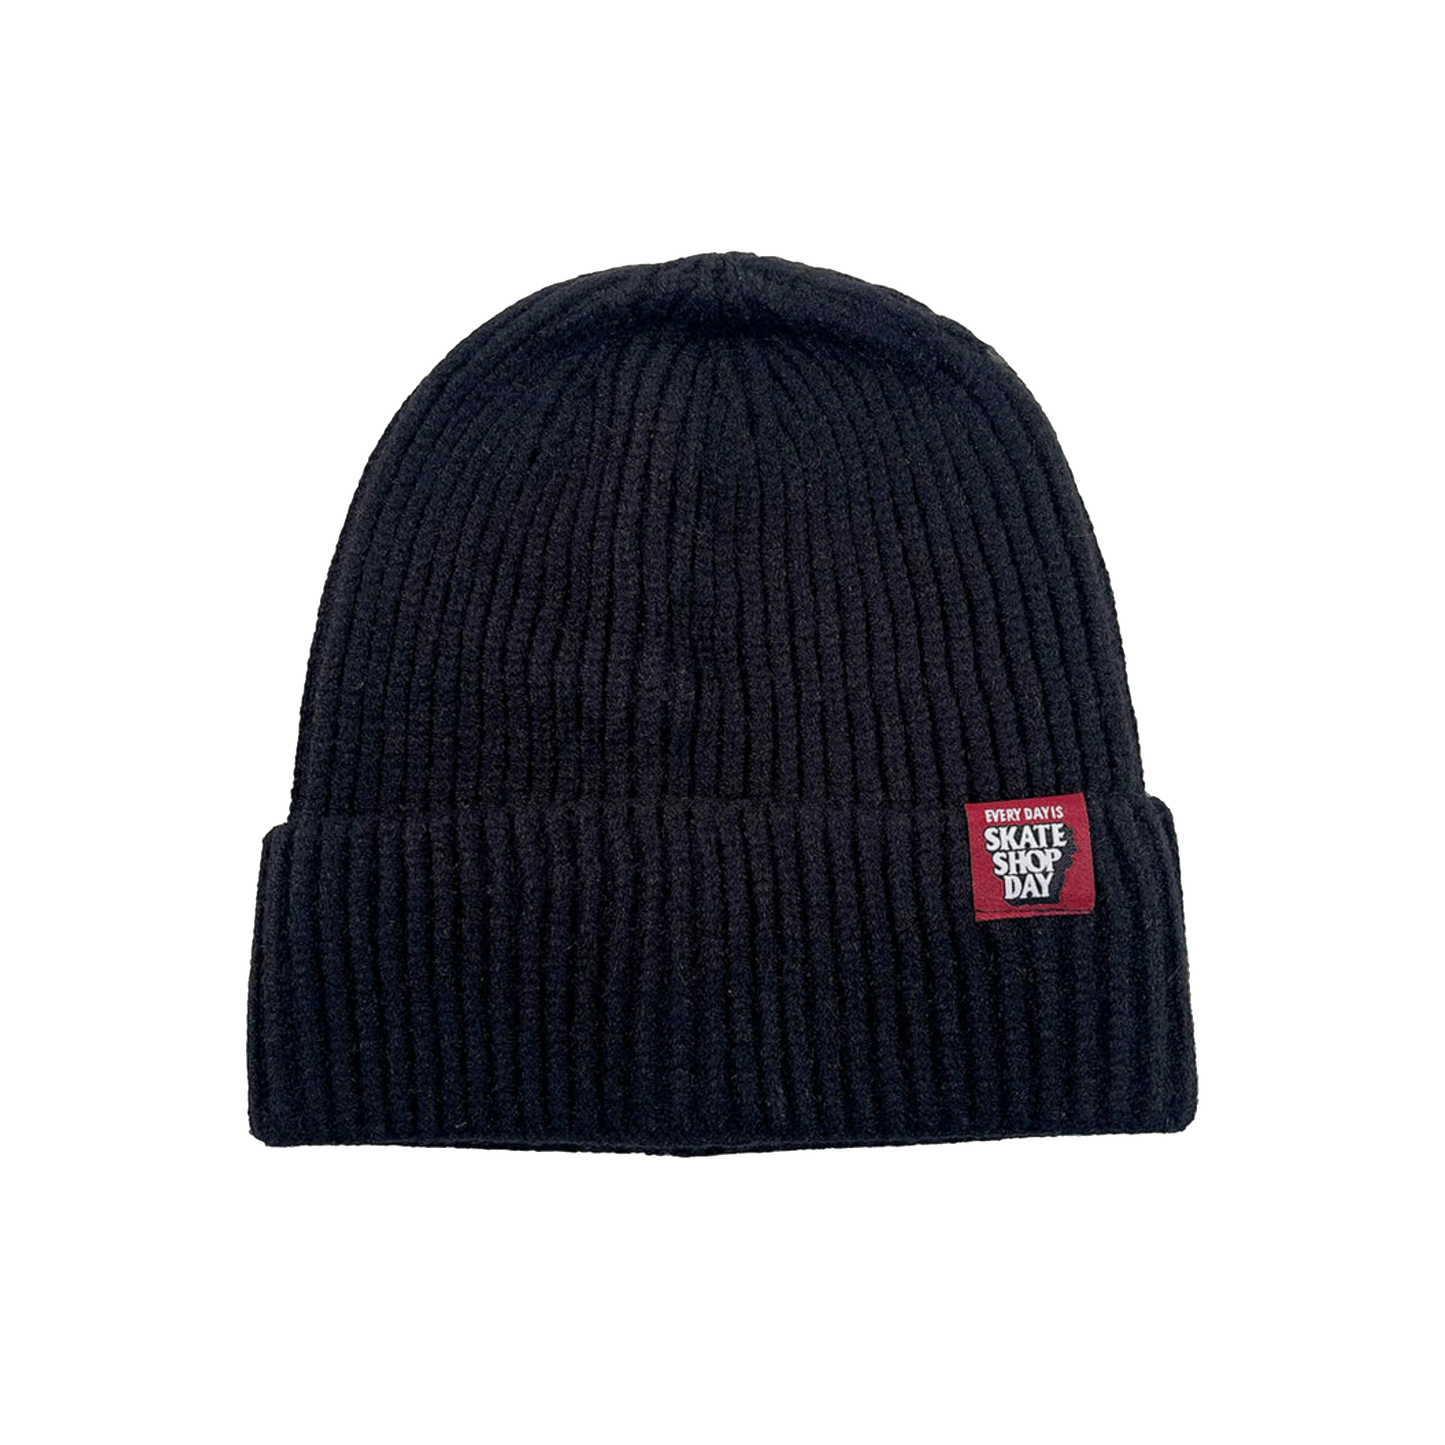 Every Day is Skate Shop Day Beanie - Black